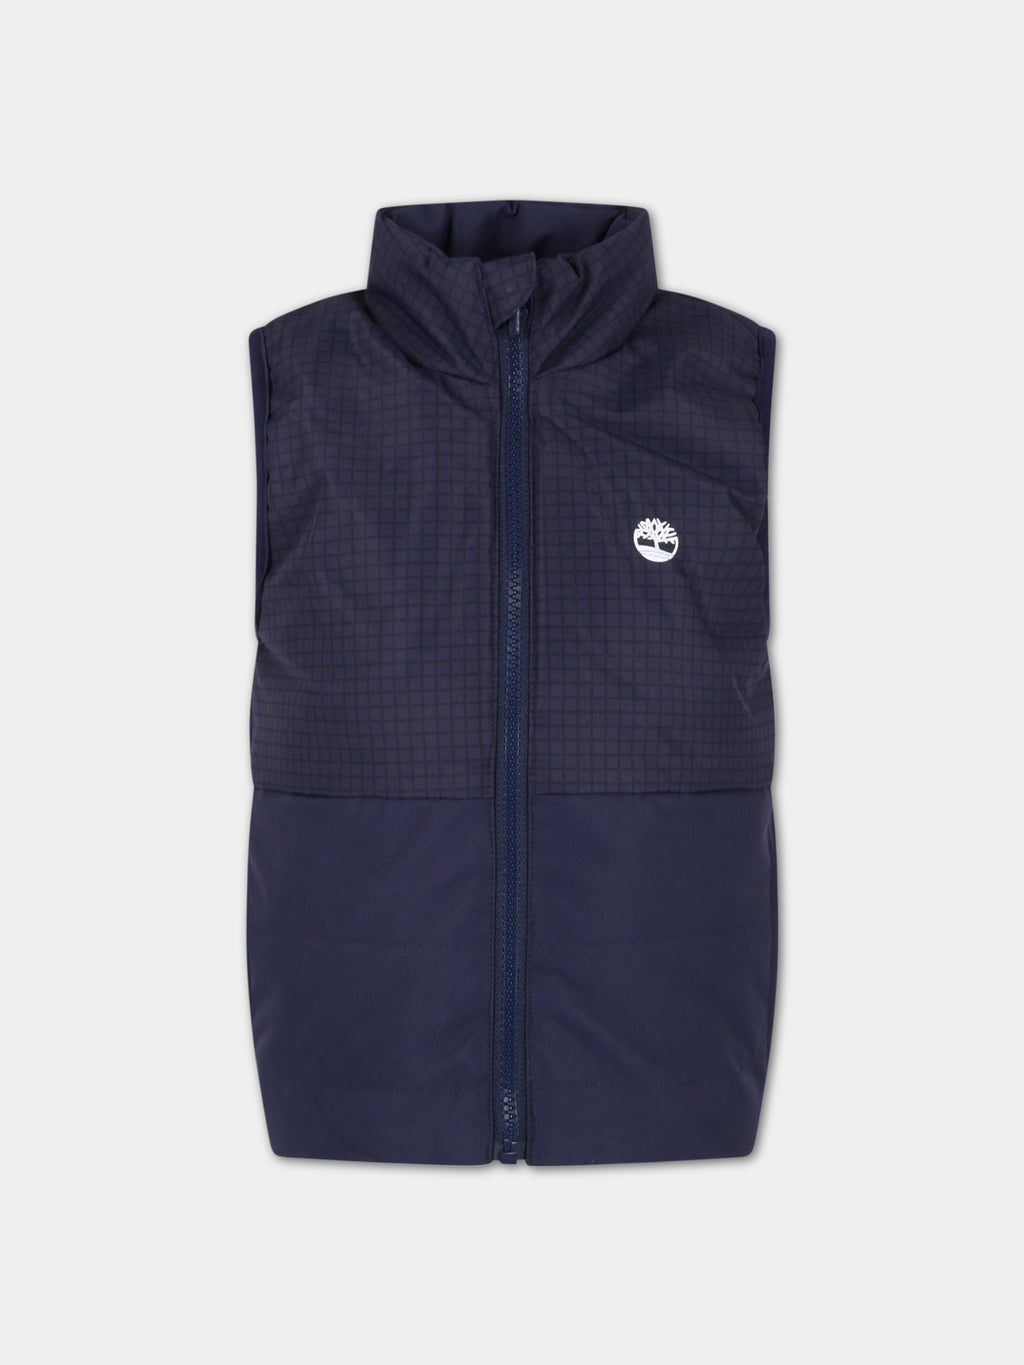 Blue gilet for boy with white logo